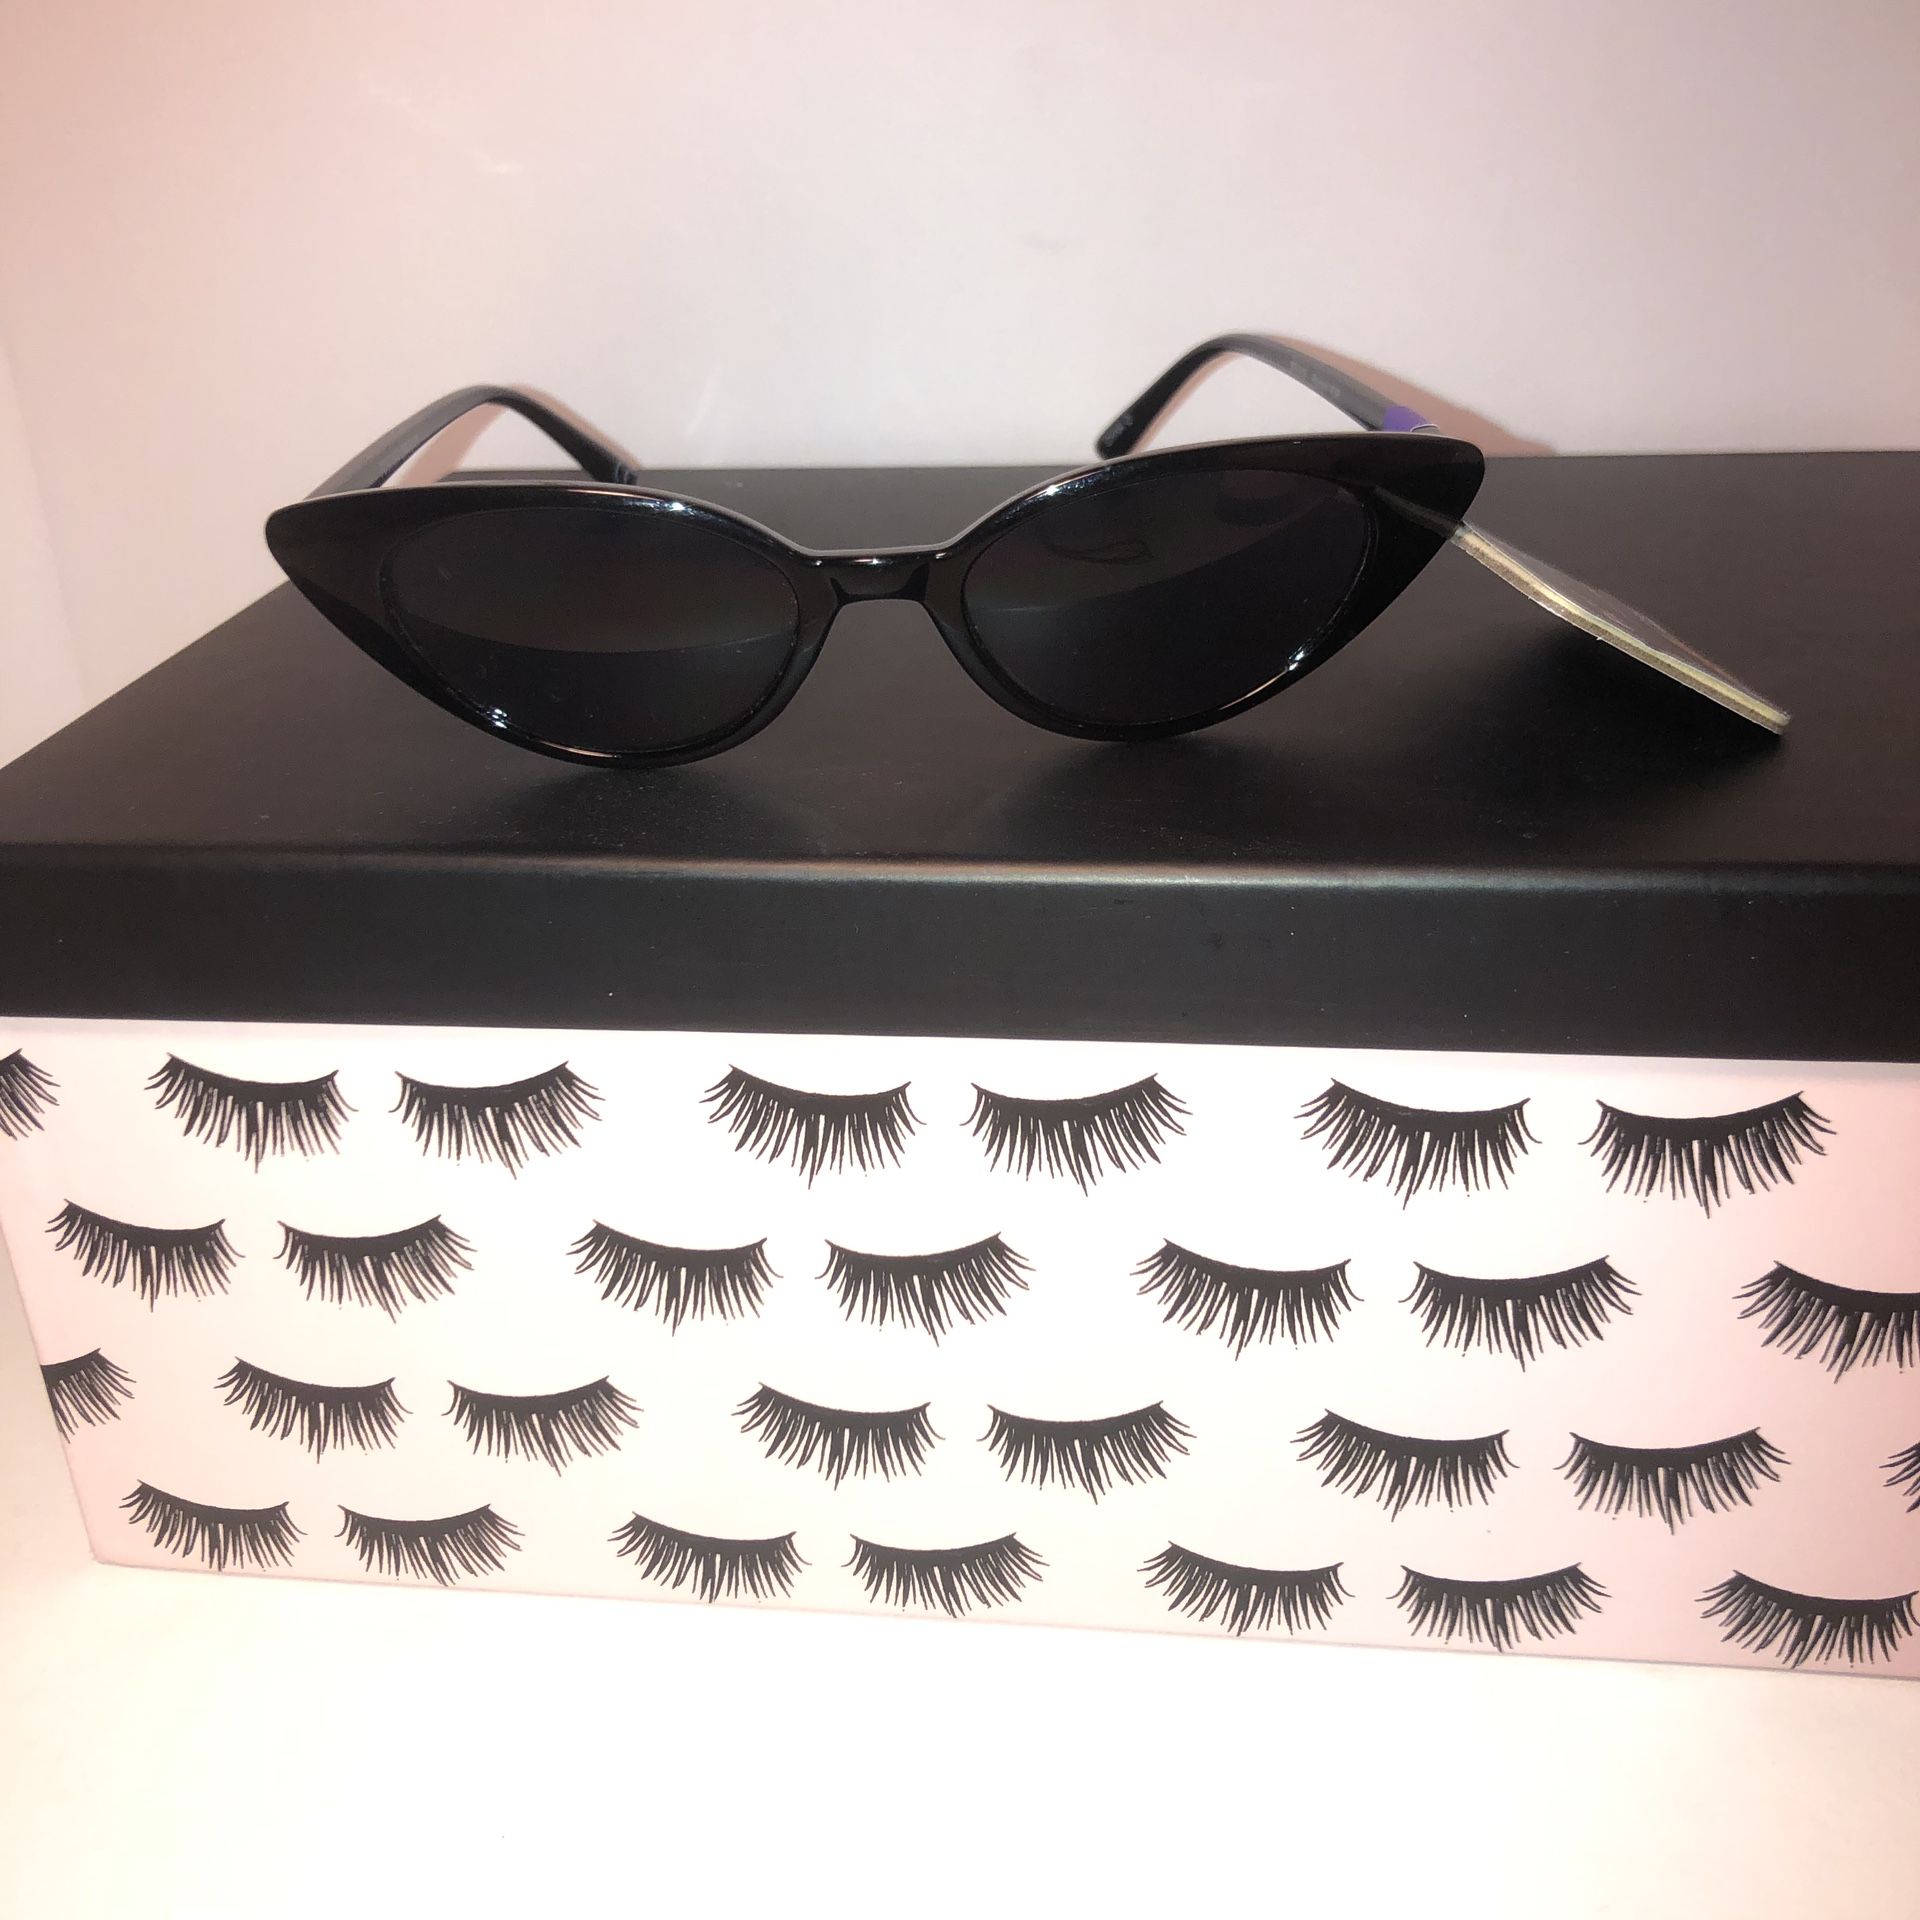 NEW WITH TAGS Foster Grant black cat eye style sunglasses